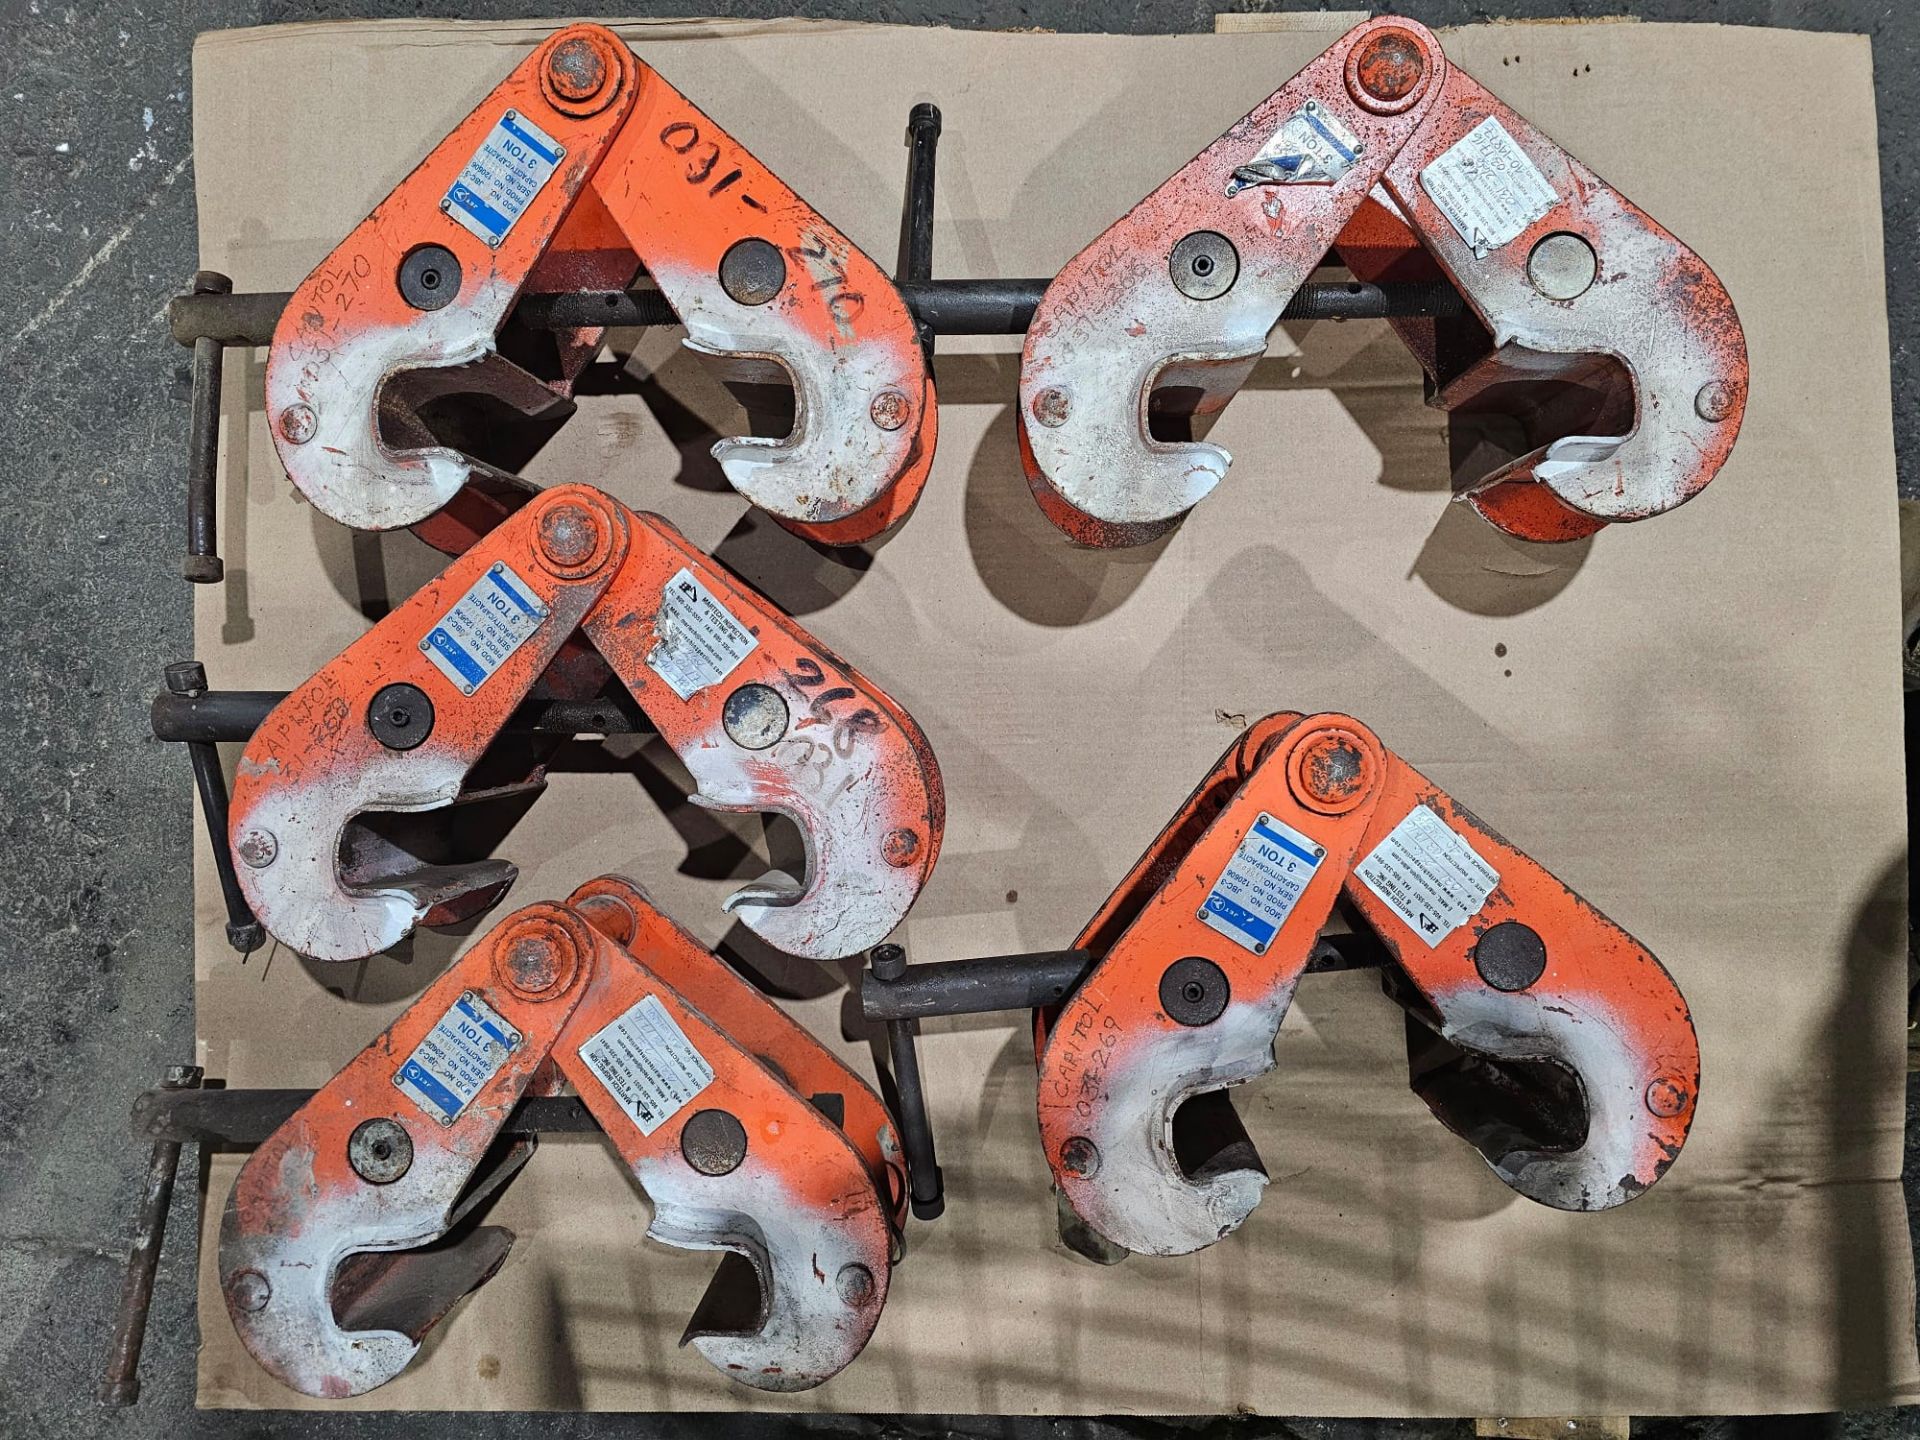 Lot of 5 JET 3 Ton I-Beam Clamps